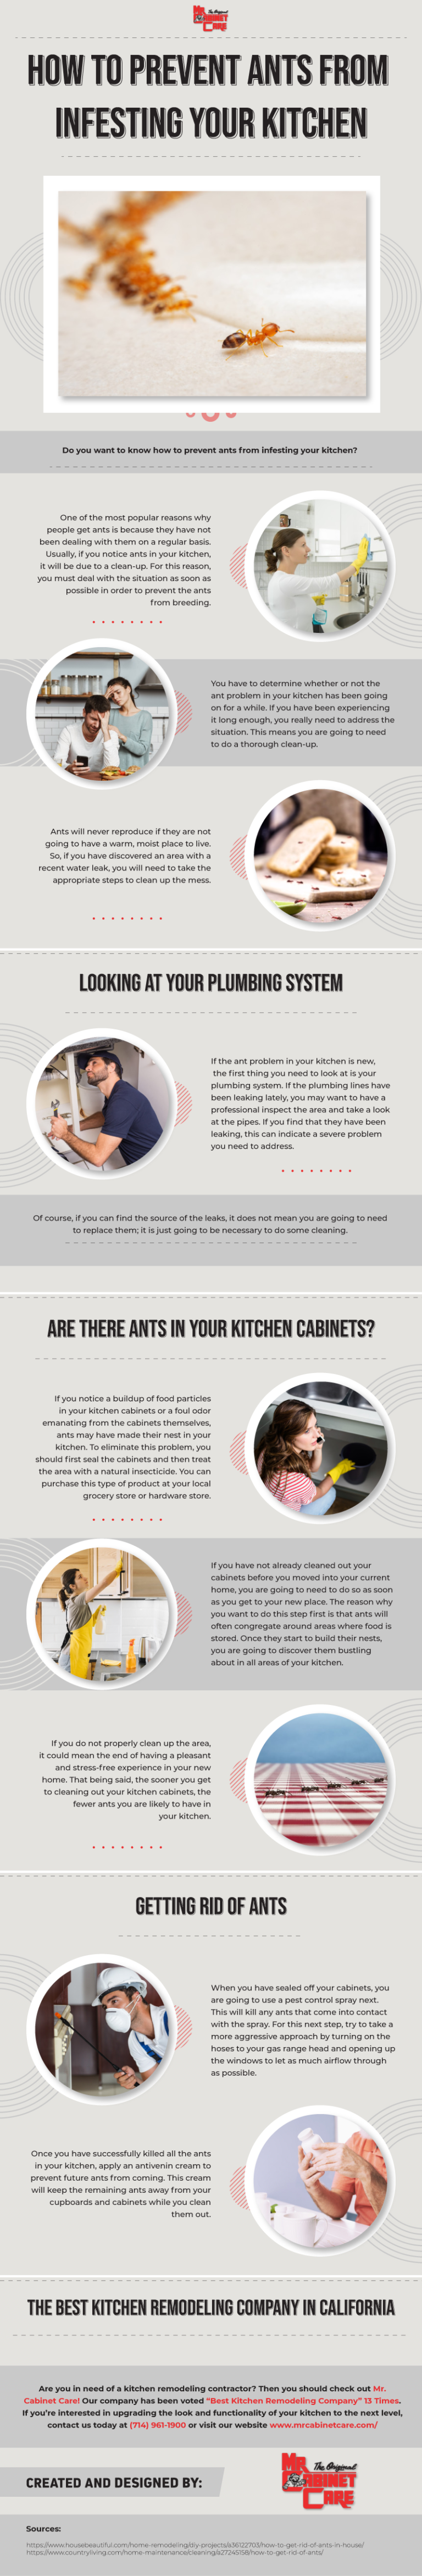 How to Prevent Ants from Infesting Your Kitchen